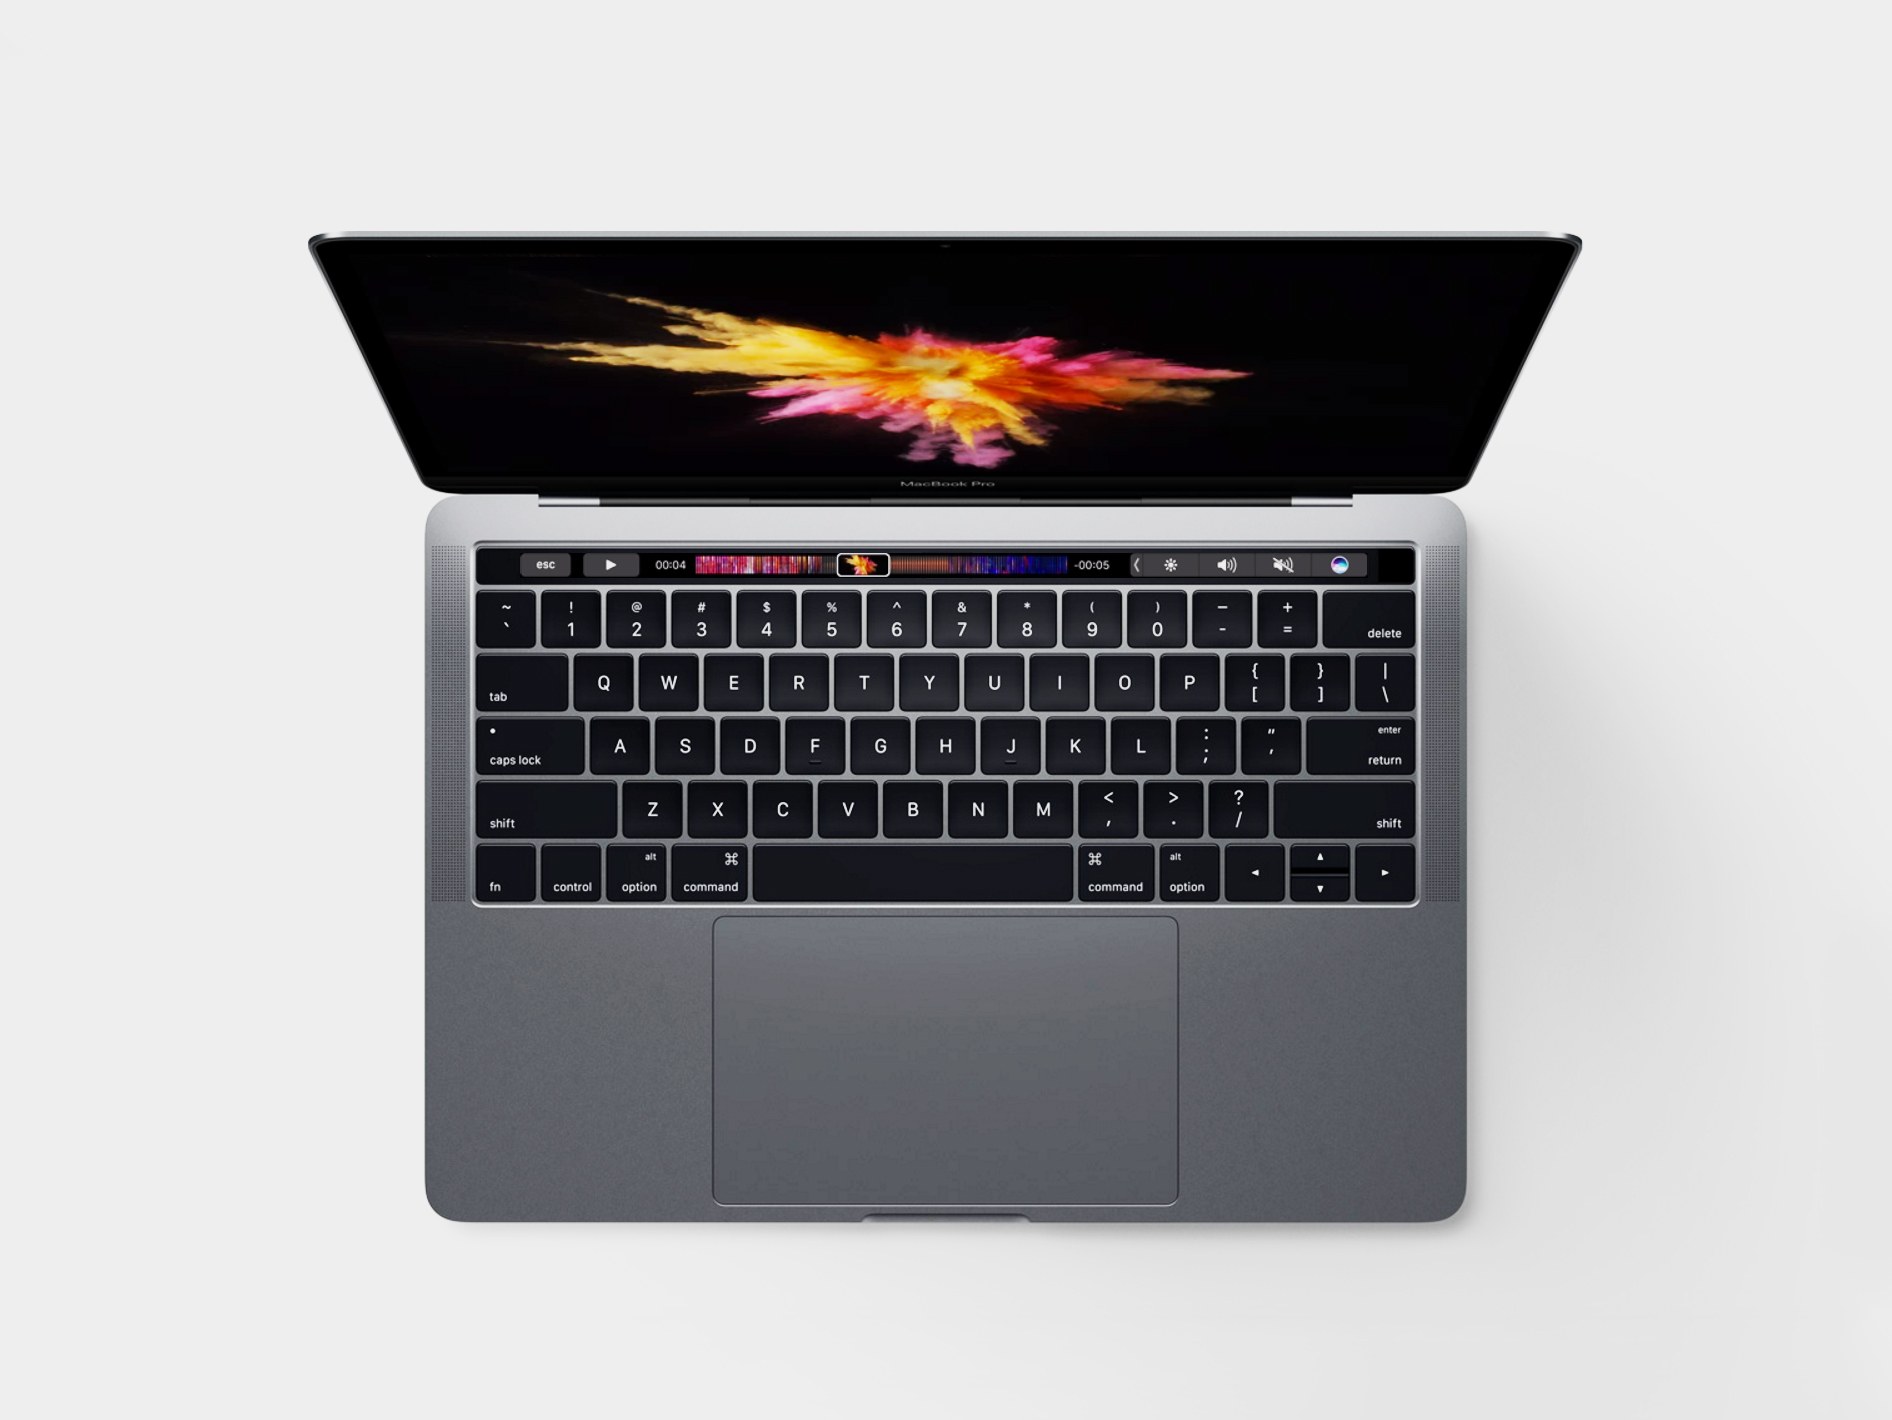 Apple MacBook Pro 2016: Pricing and Details | WIRED